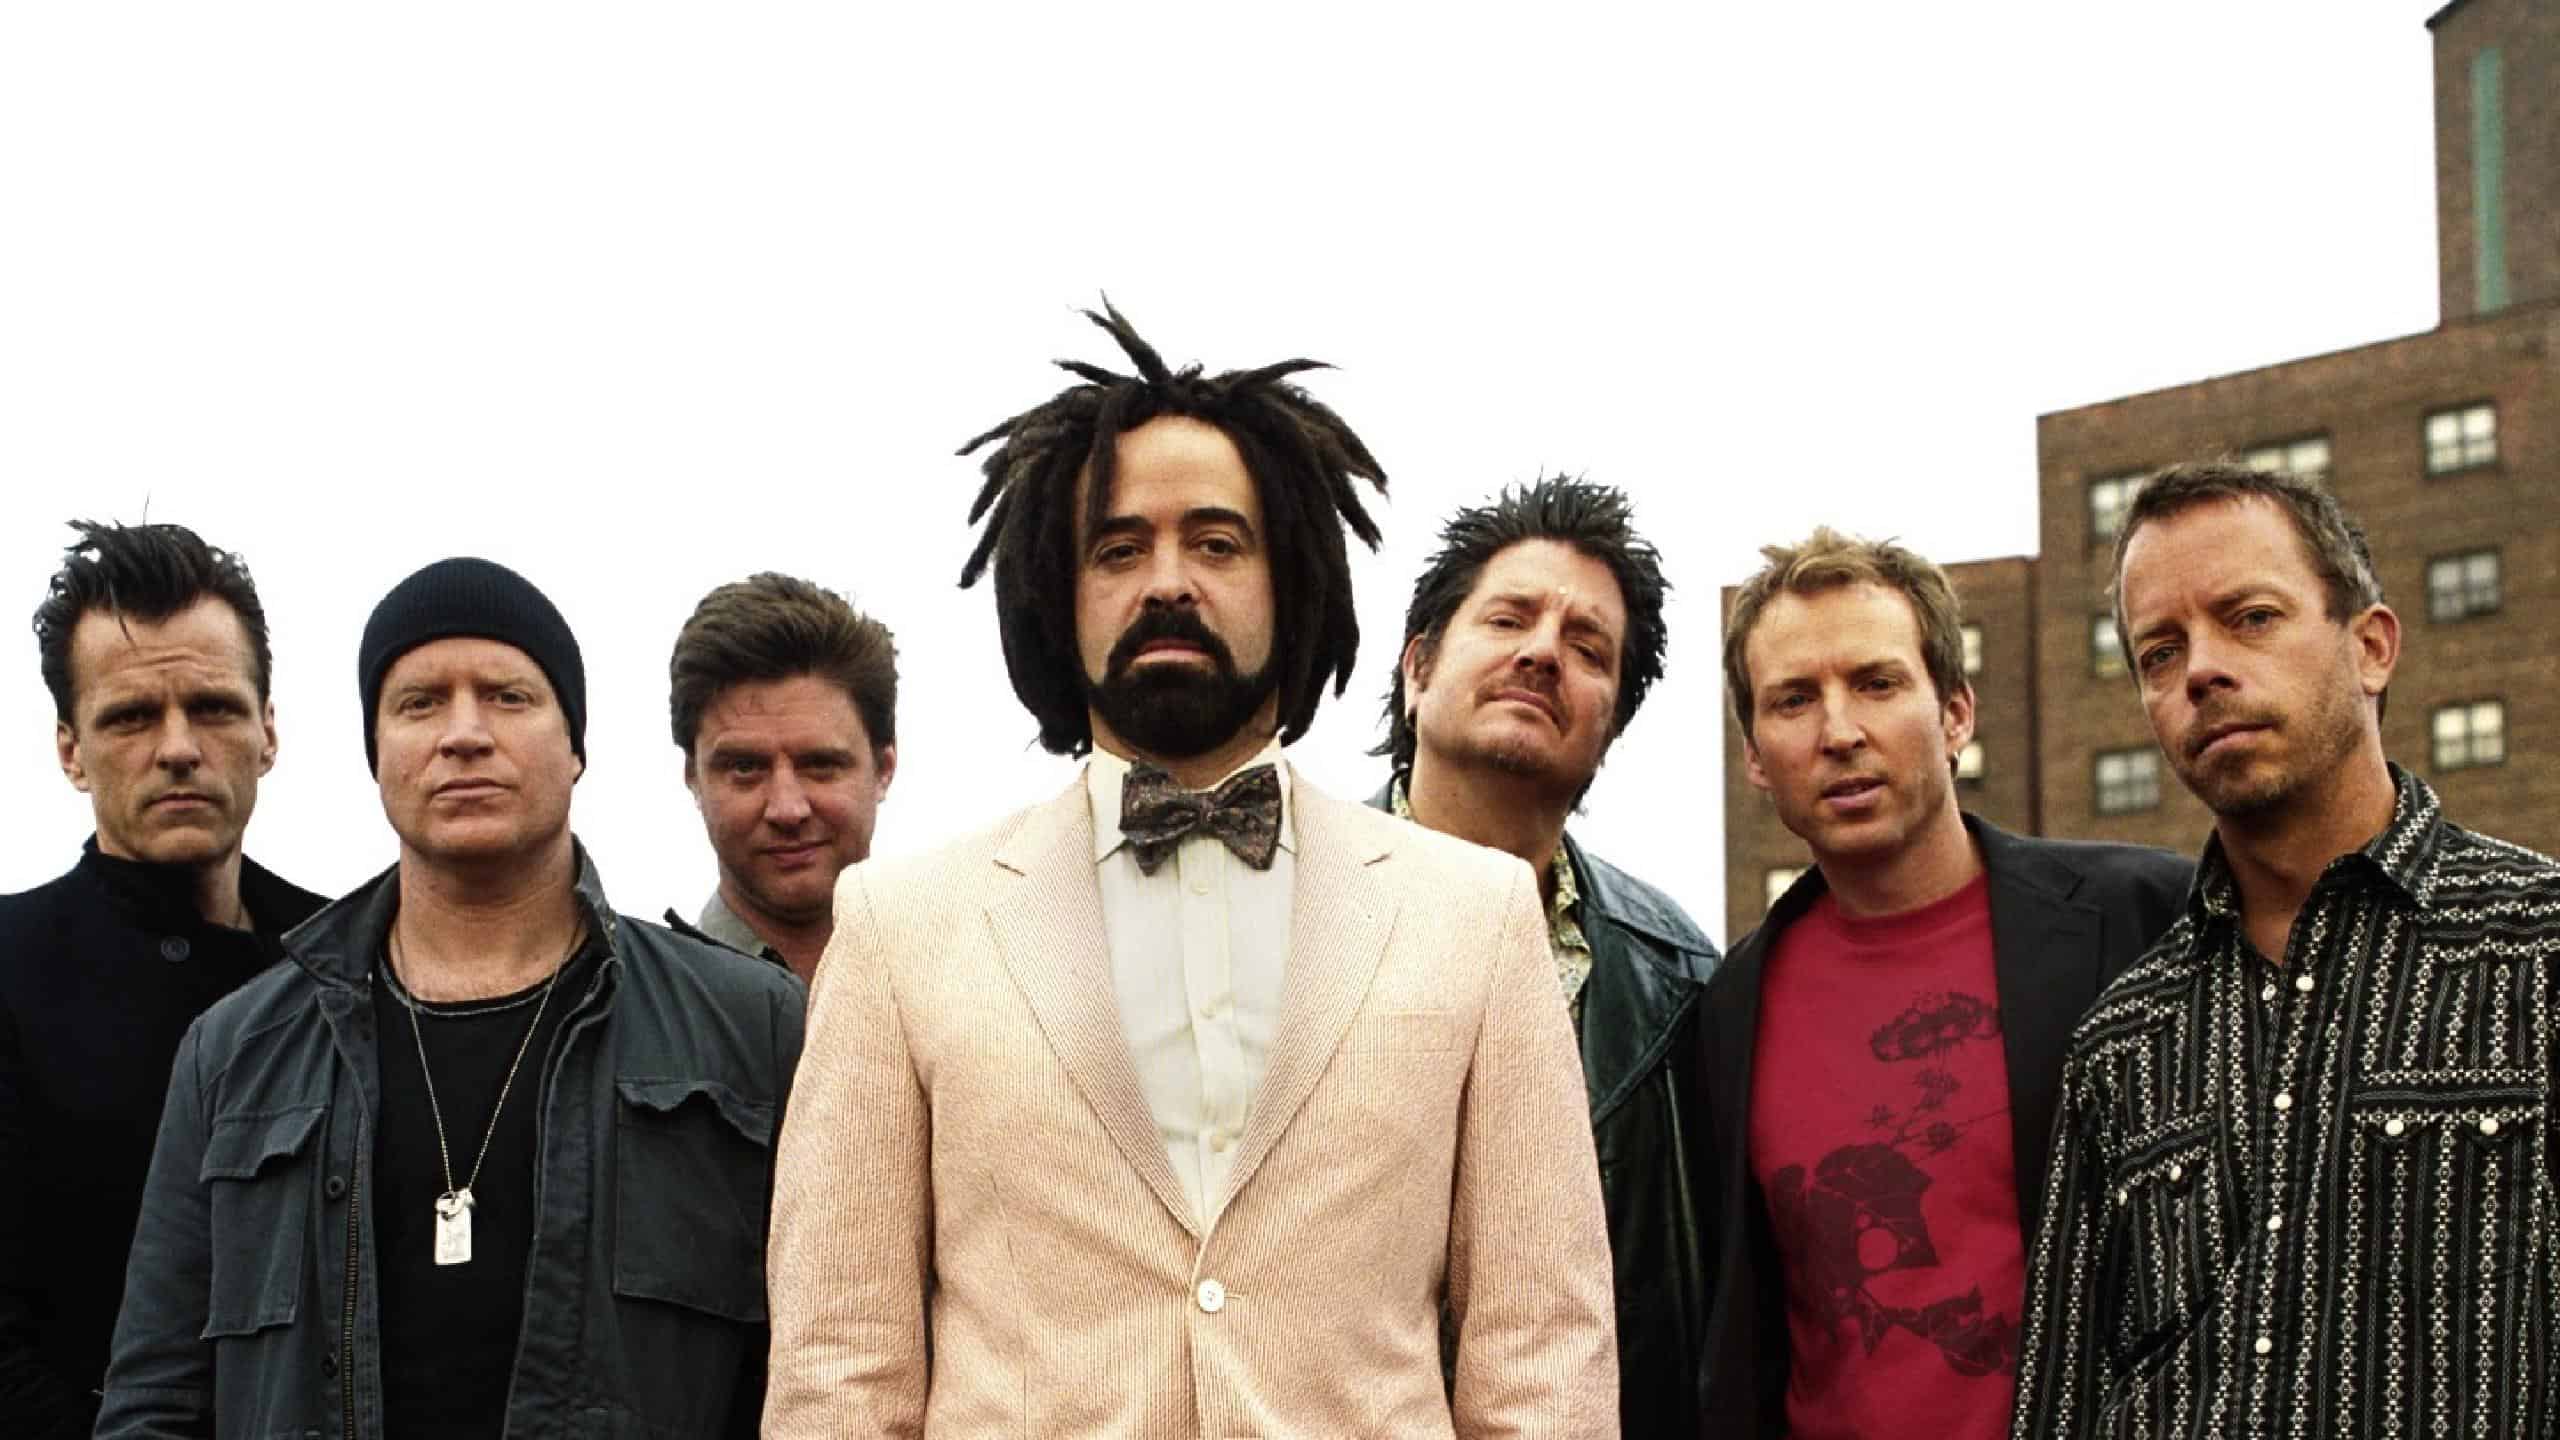 The Counting Crows photo